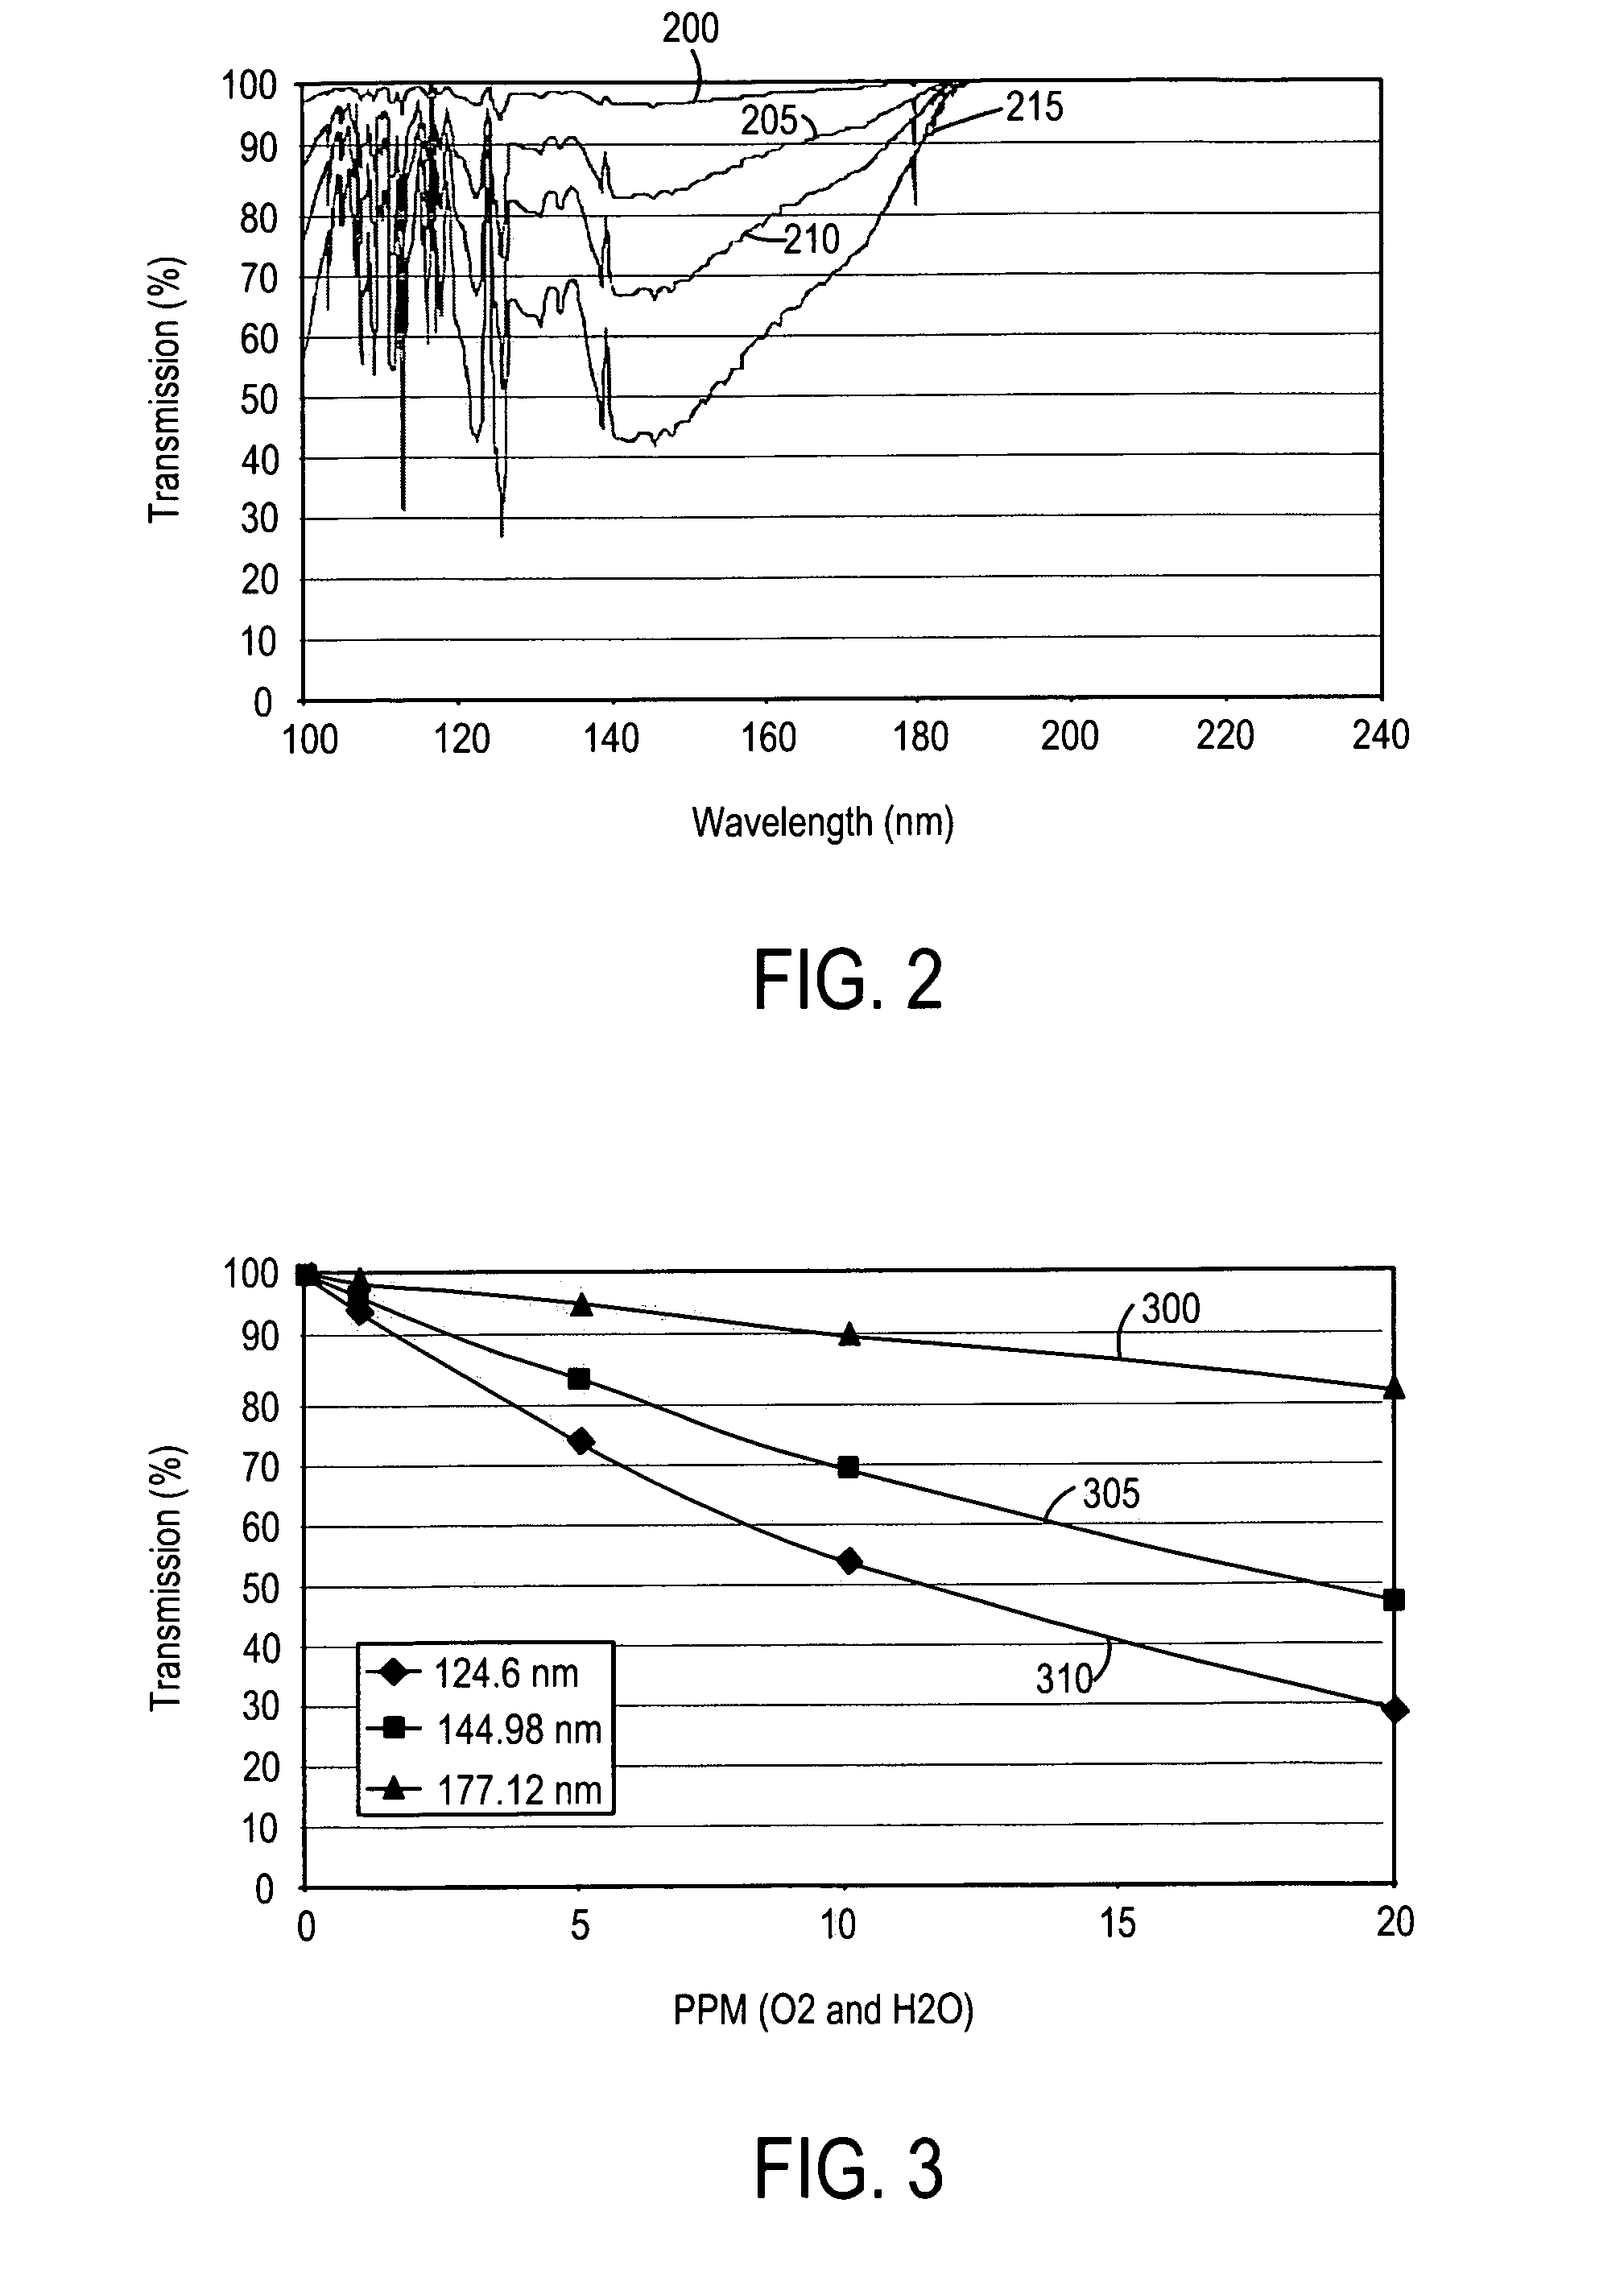 Contamination monitoring and control techniques for use with an optical metrology instrument